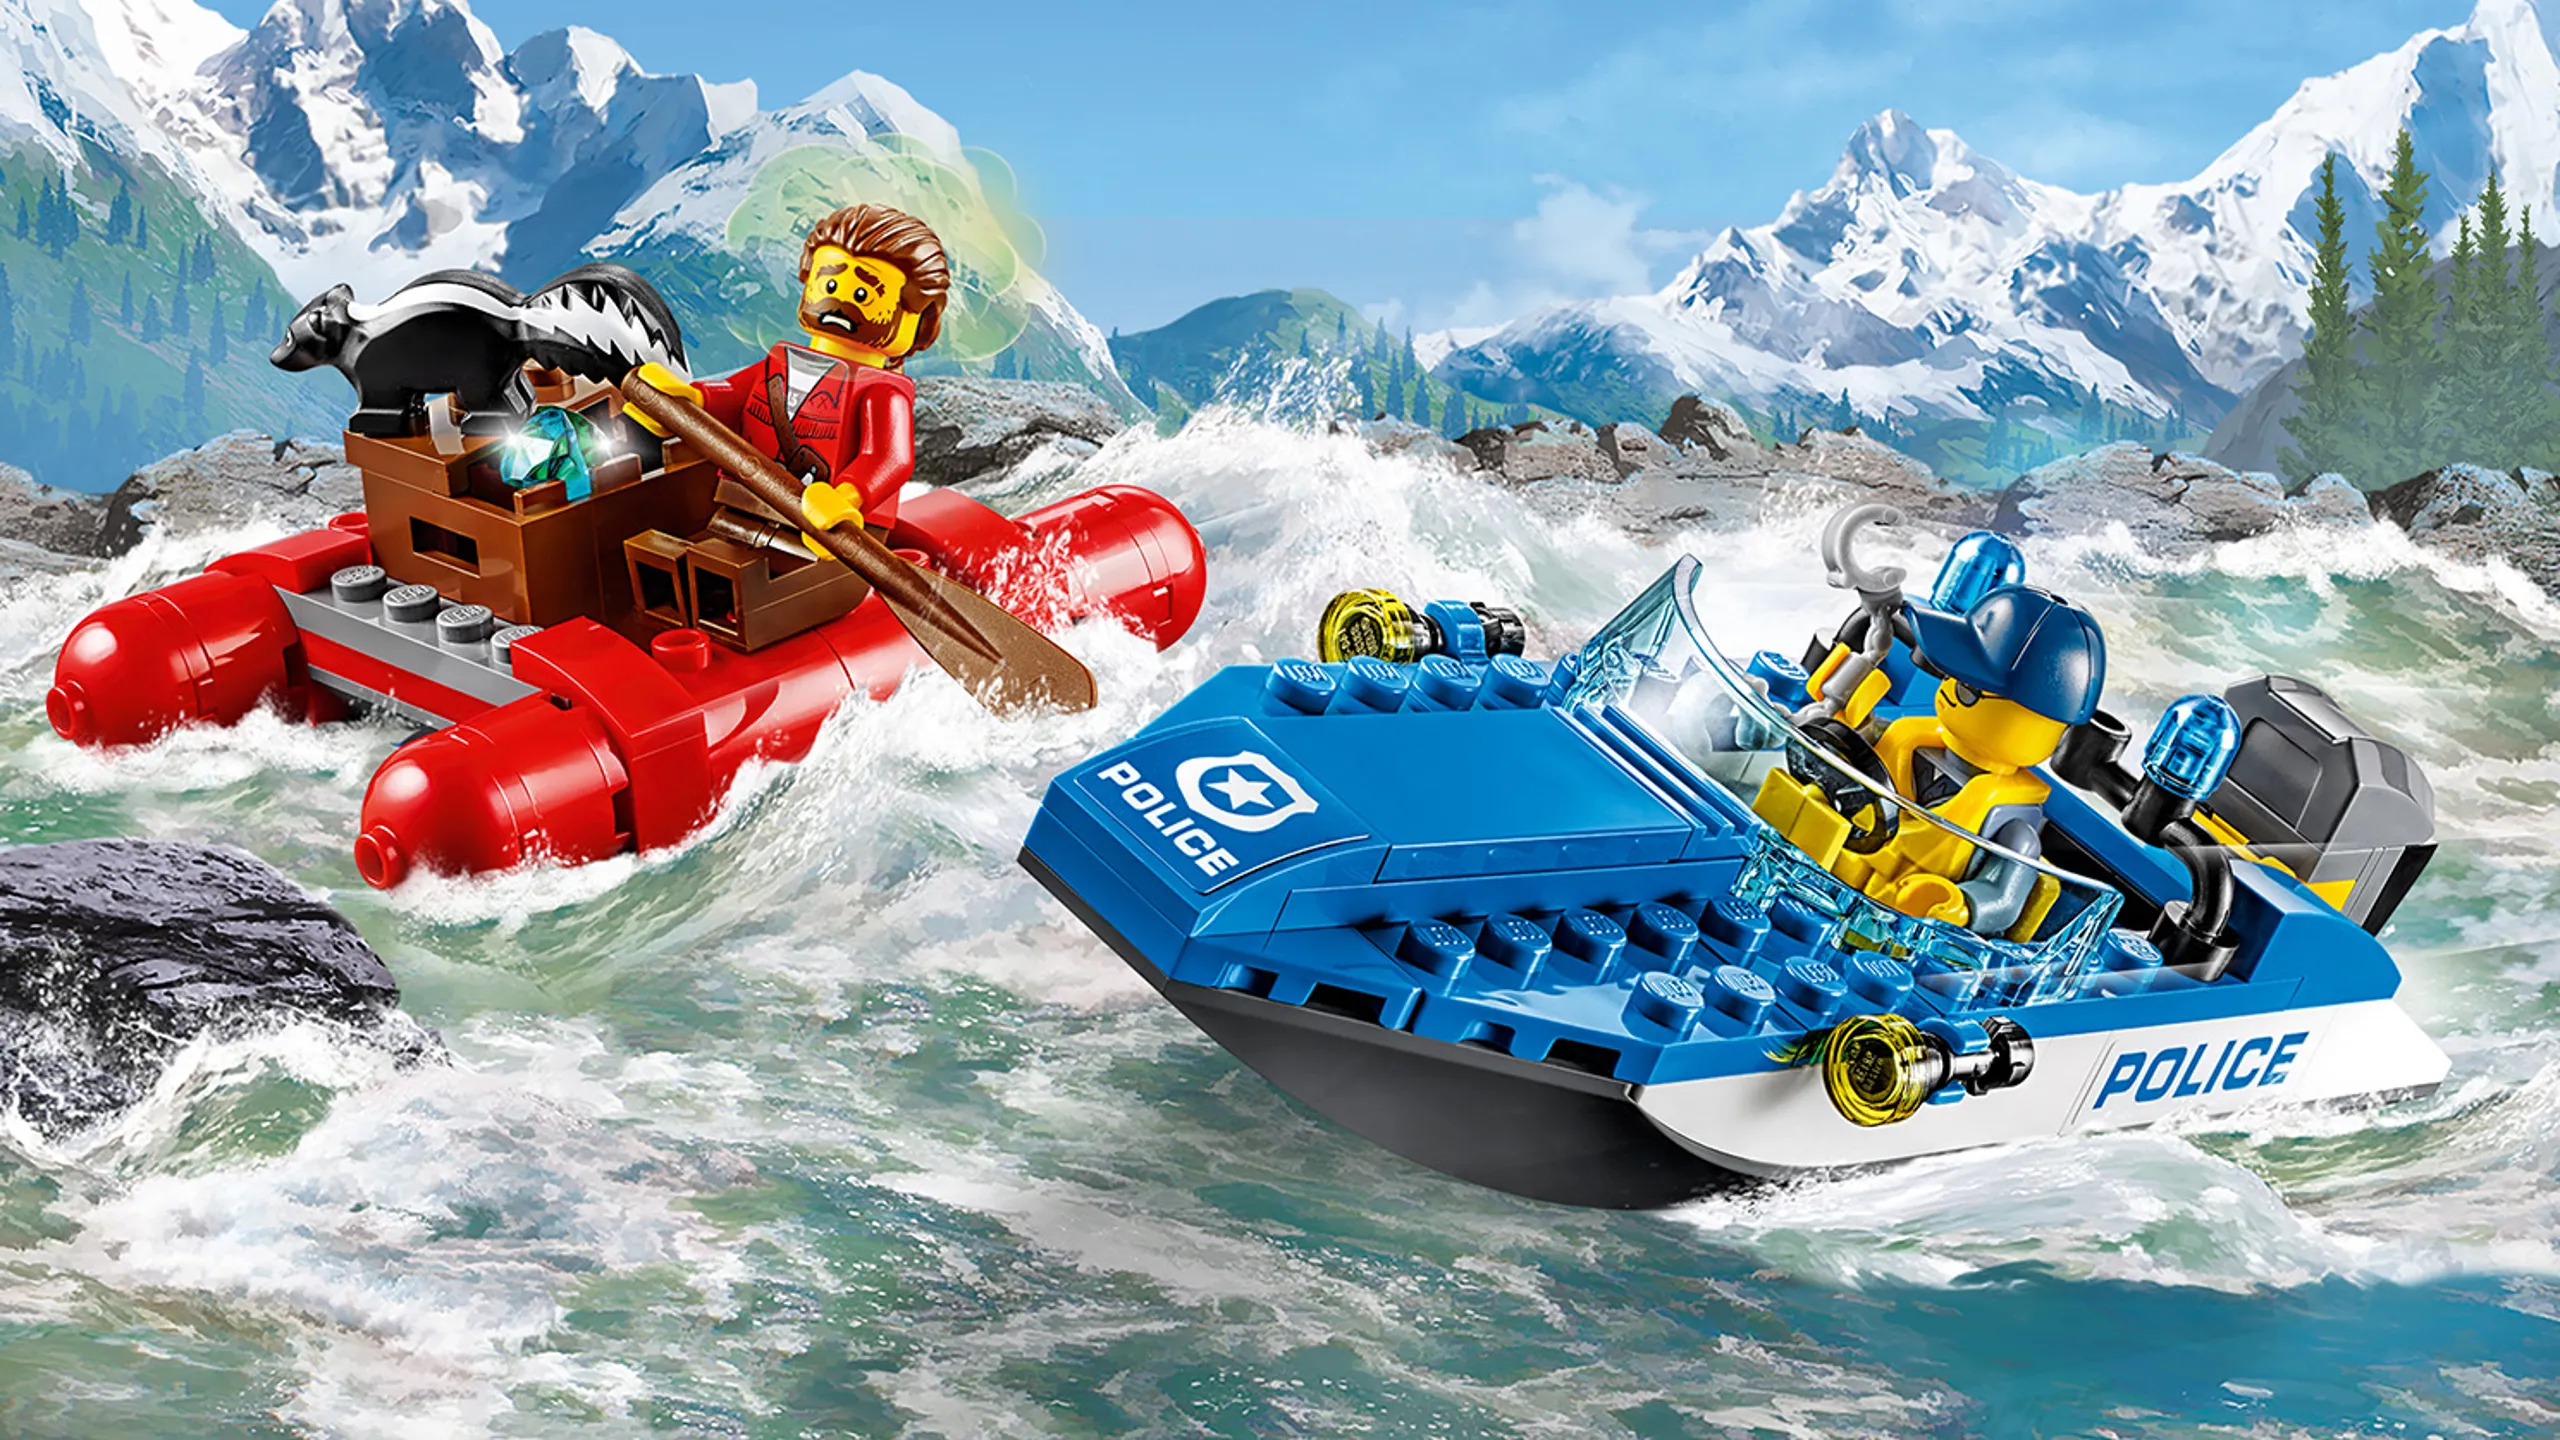 LEGO City Mountain Police - 60176 Wild River Escape - The police boat chases the crook in a red raft escaping with diamonds and a skunk.